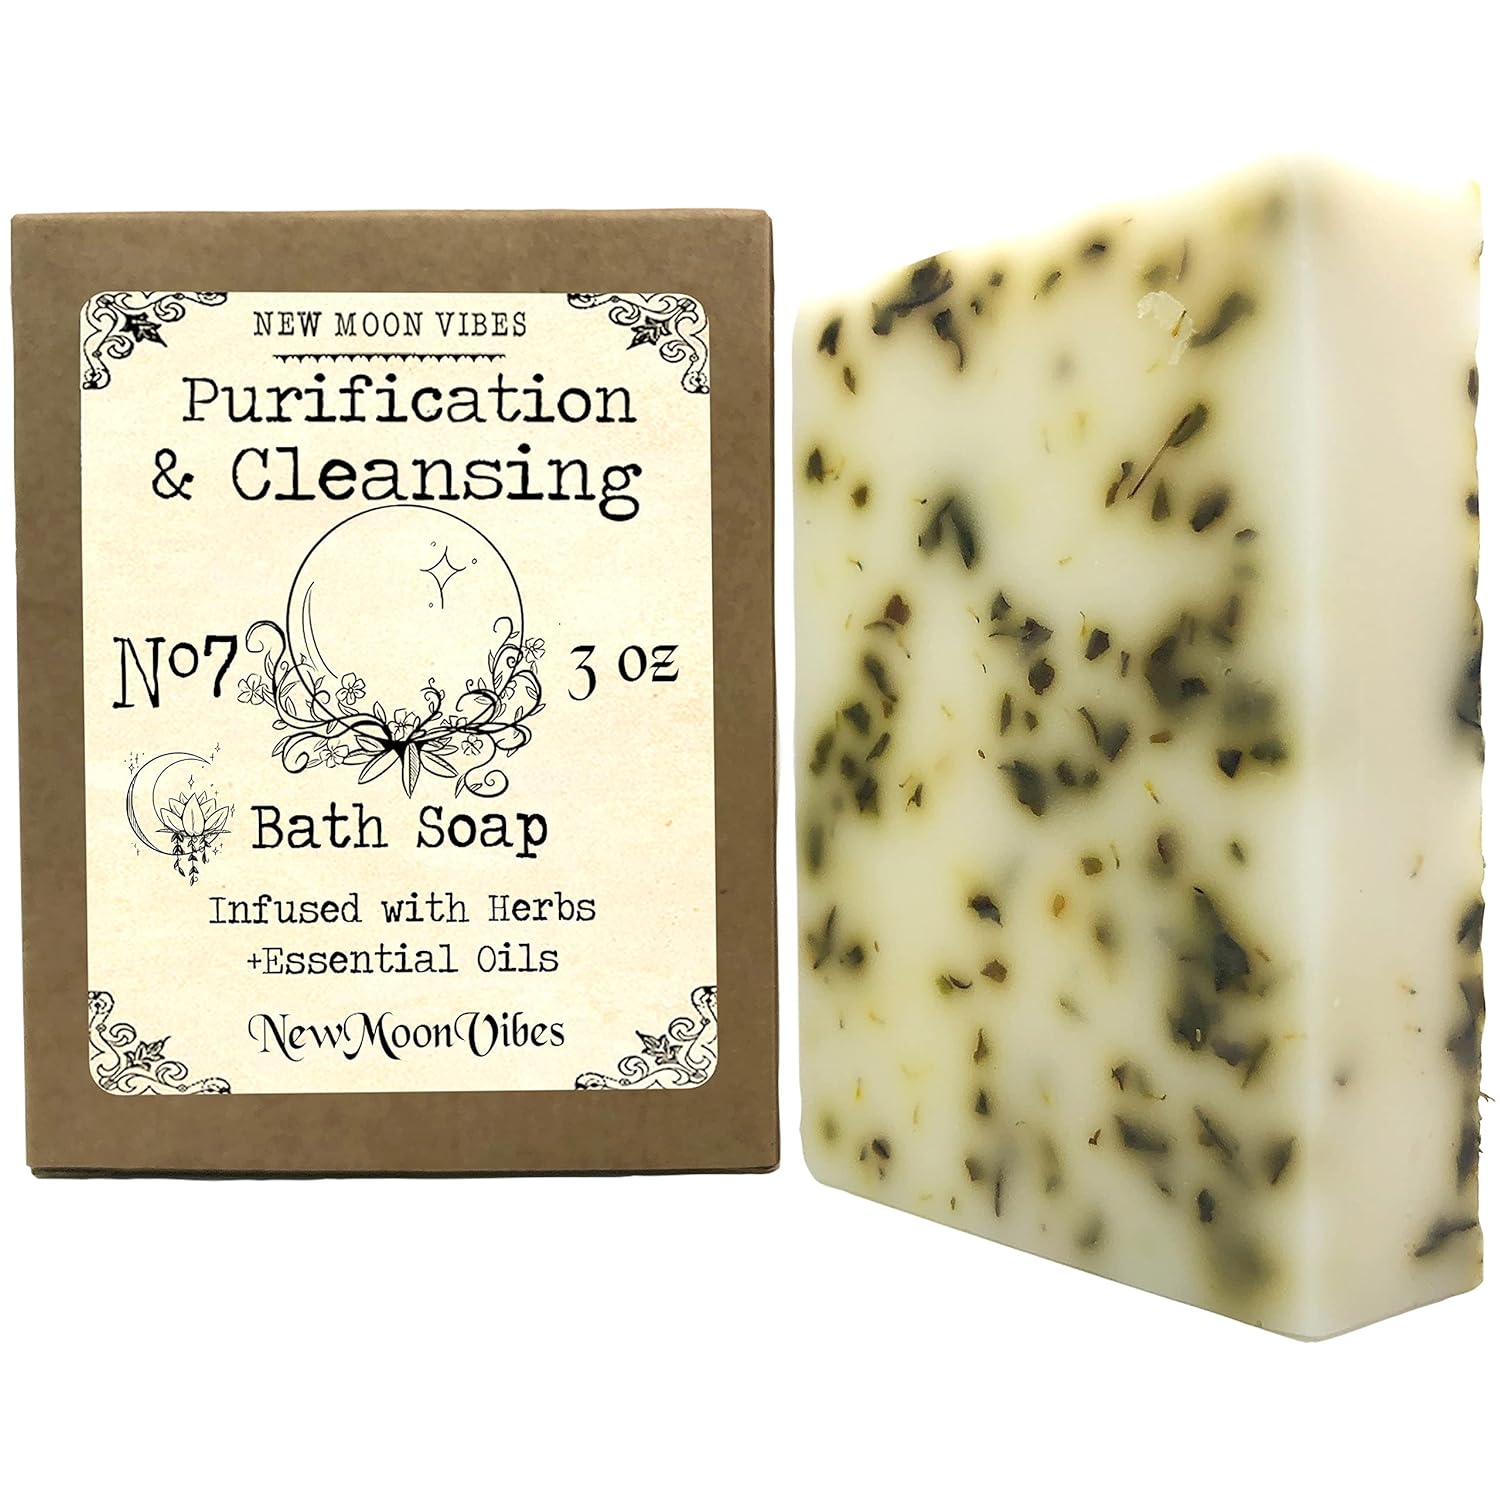 Purification & Cleansing Essential Oils Herbal Ritual Bath Soap Bar Infused with Real Herbs Botanicals Scented Smudge Banish Negative People Feelings Guilt Sadness Grief Unwanted Energy Break Spells